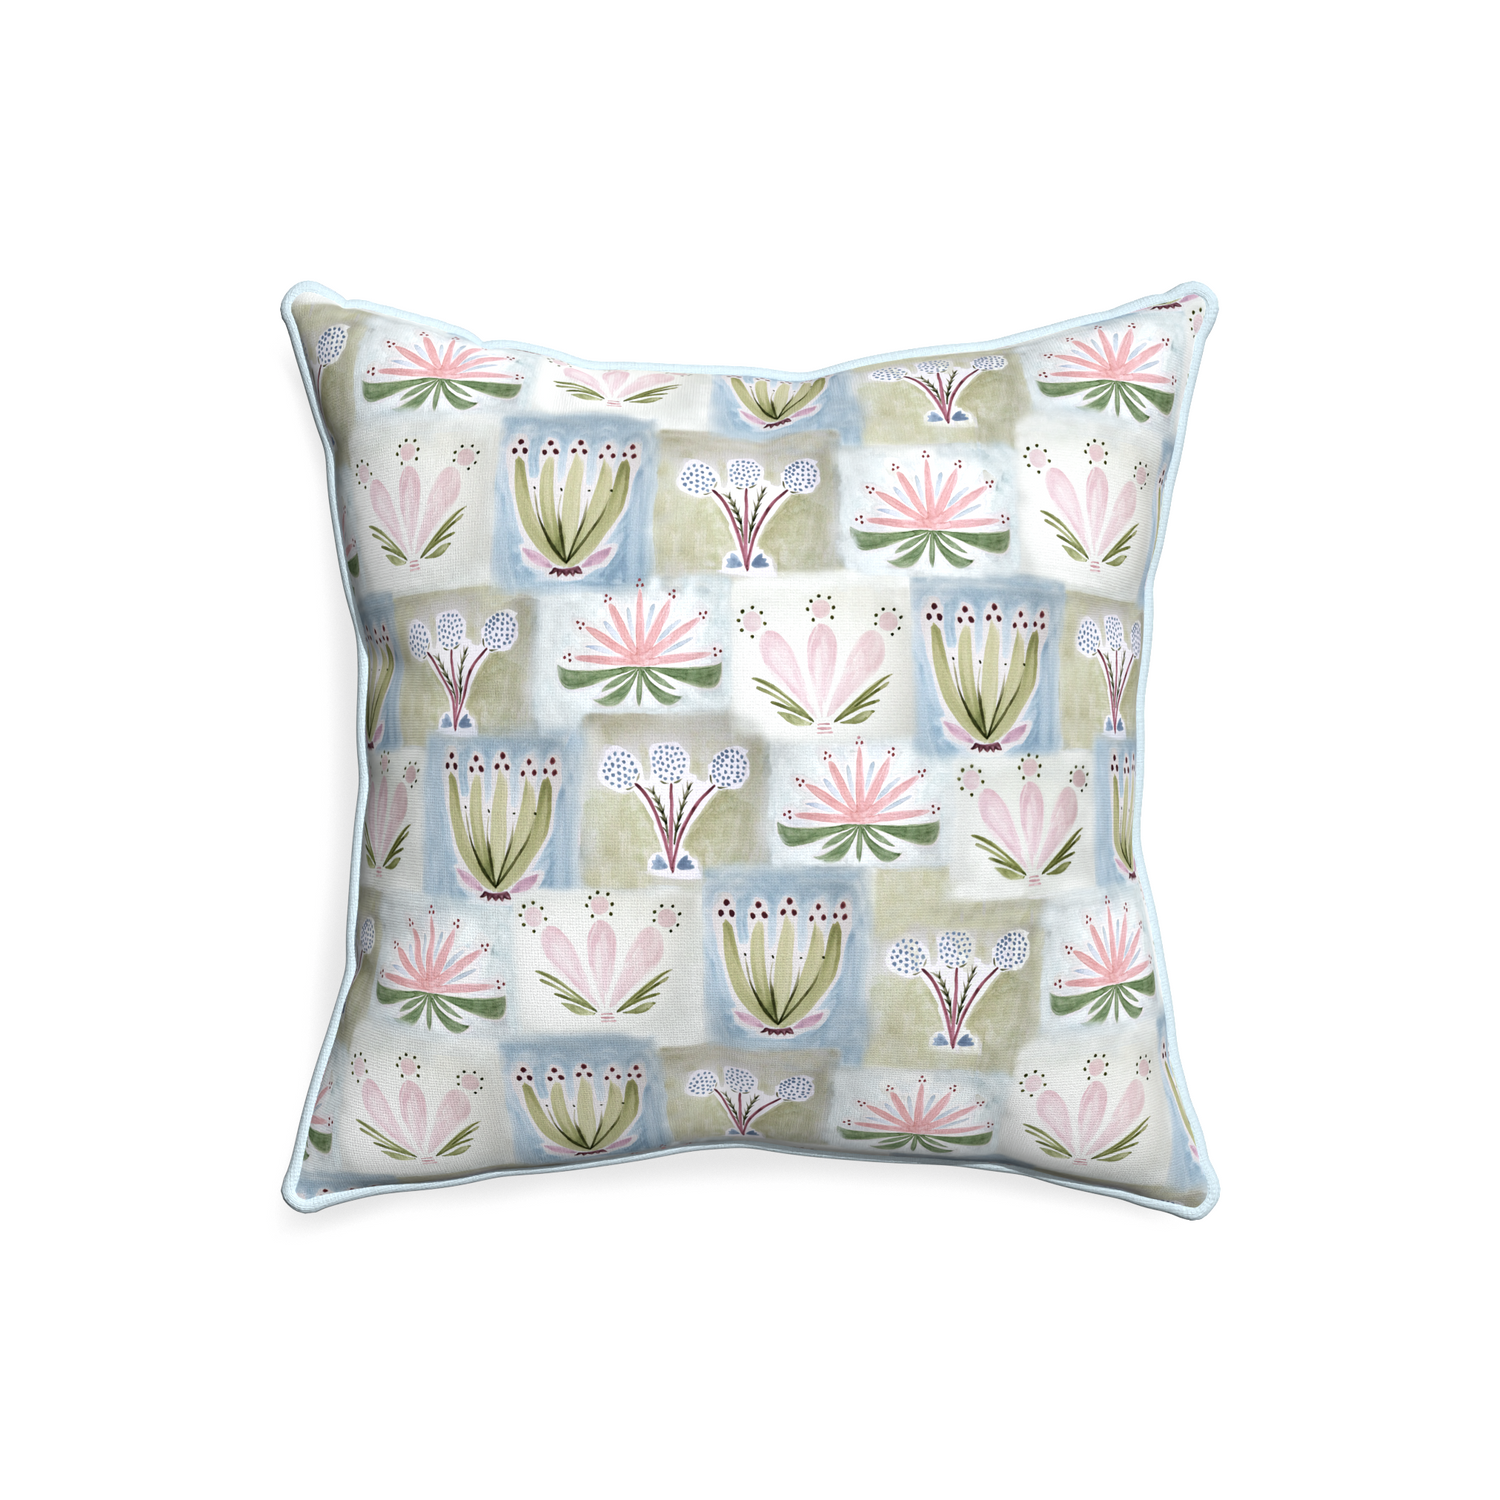 20-square harper custom hand-painted floralpillow with powder piping on white background